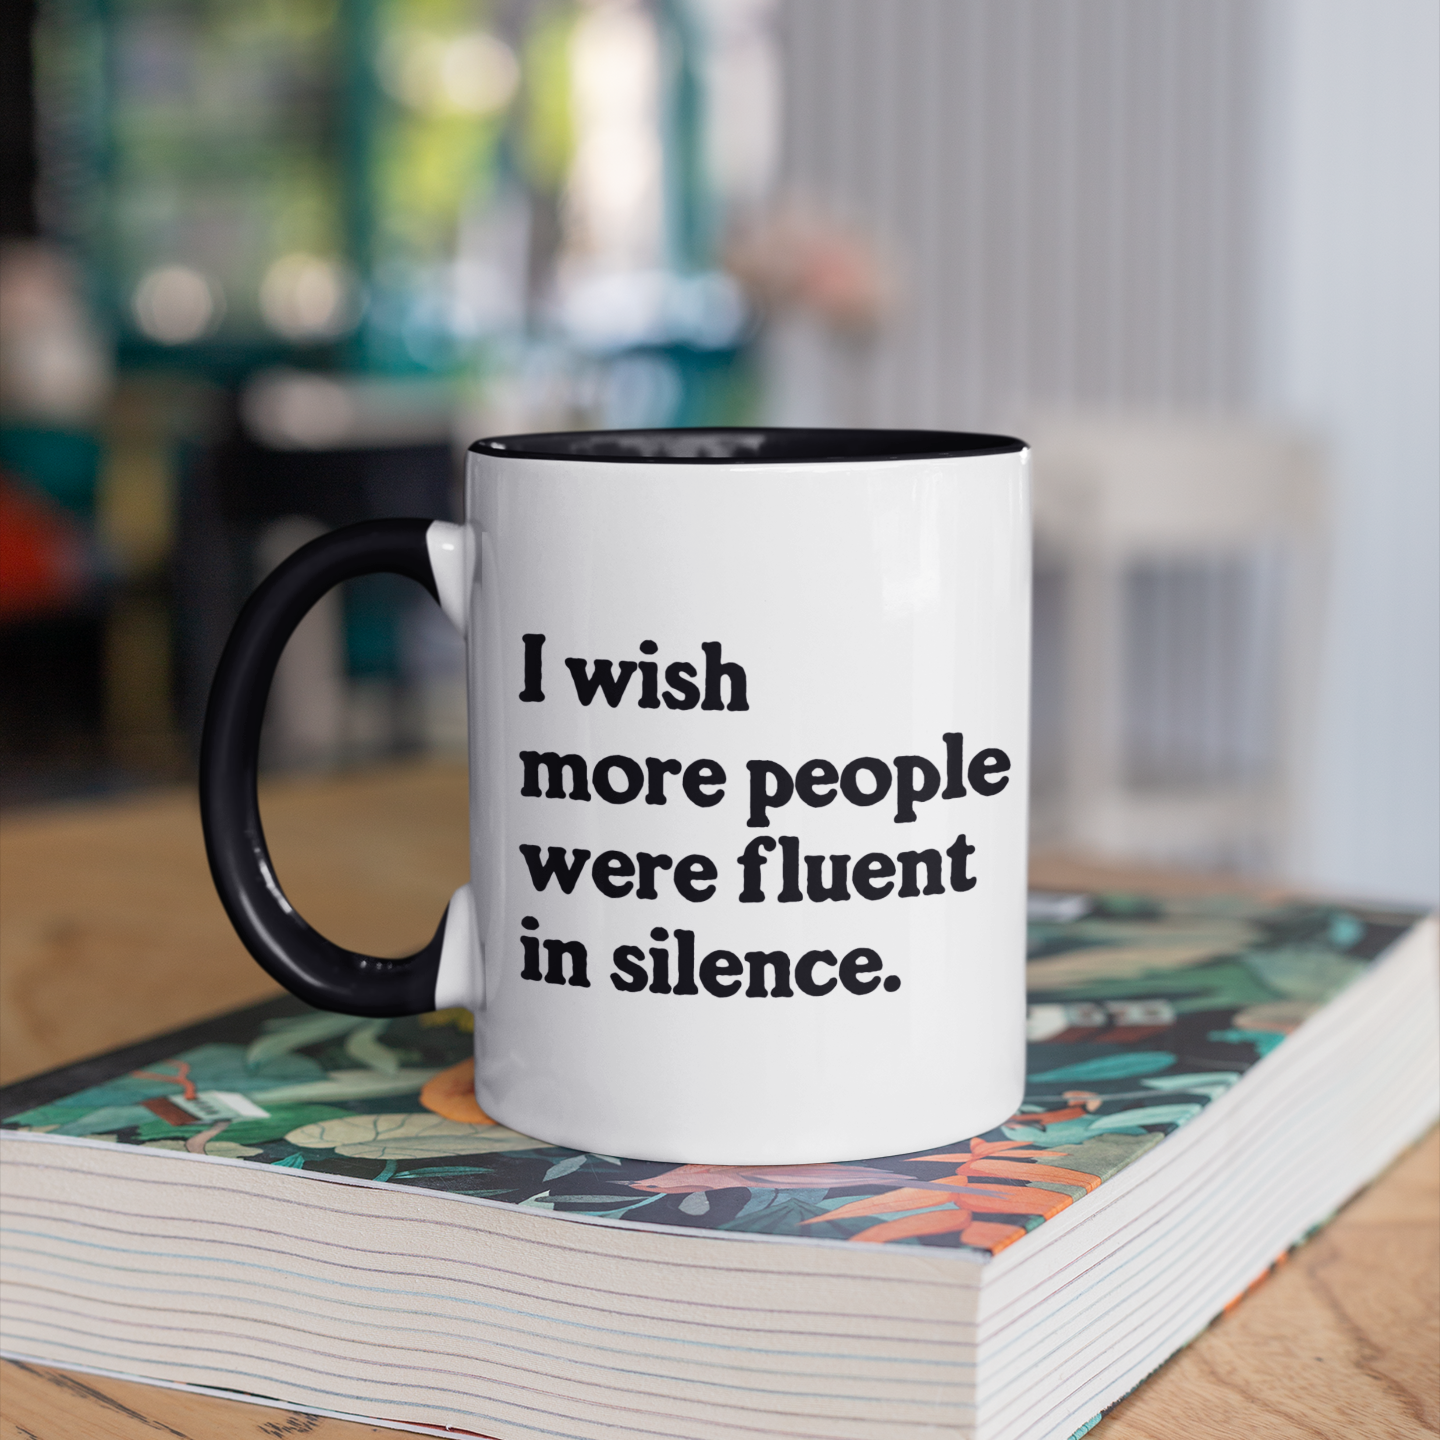 I Wish More People Were Fluent in Silence Coffee Mug